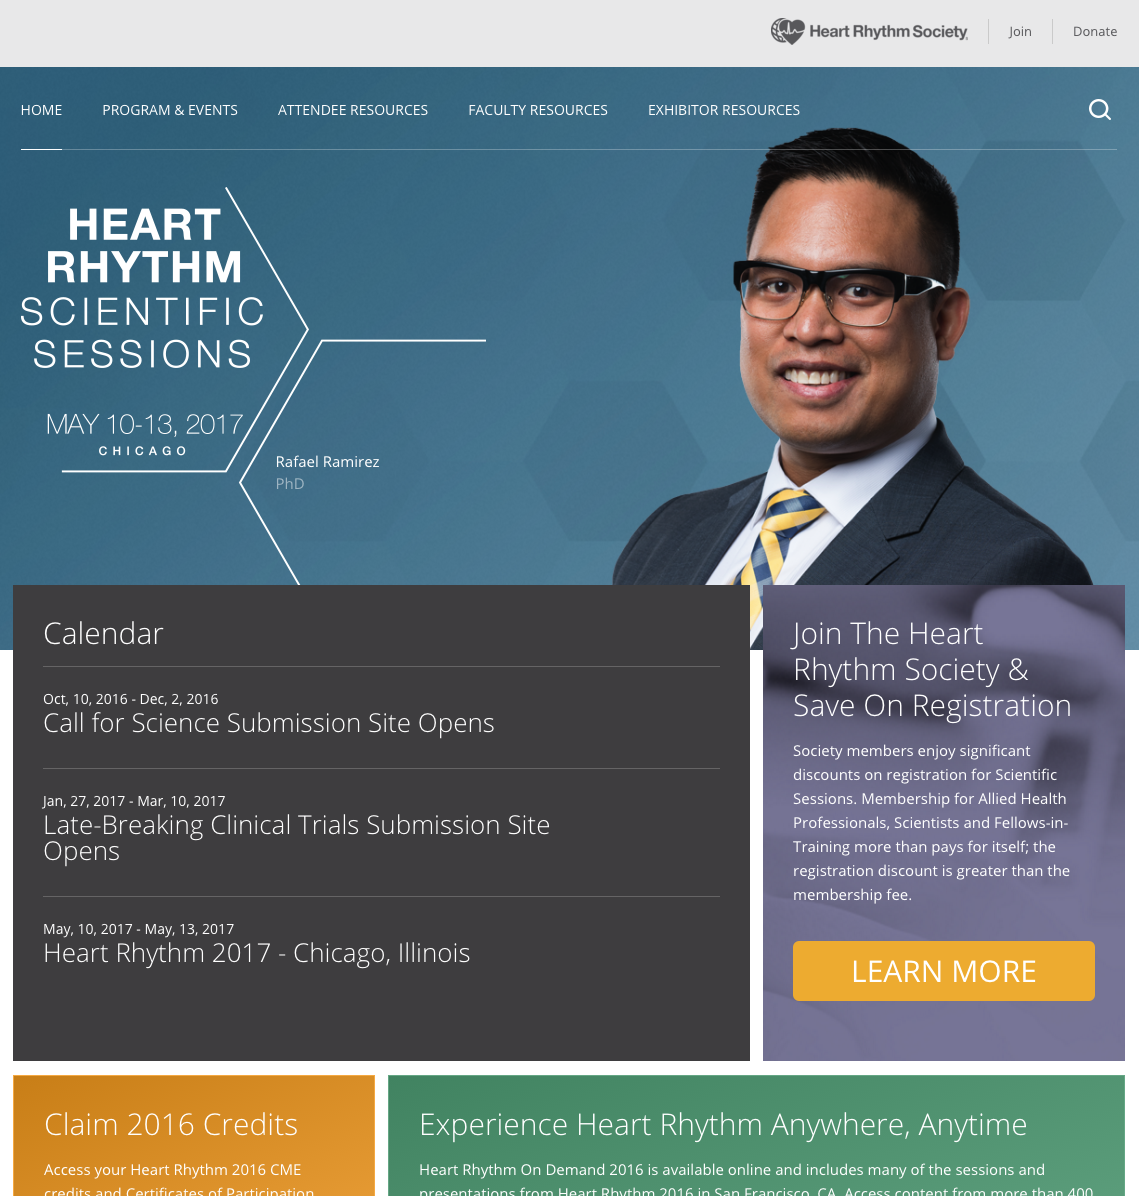 Heart Rhythm Scientific Sessions Microsite image